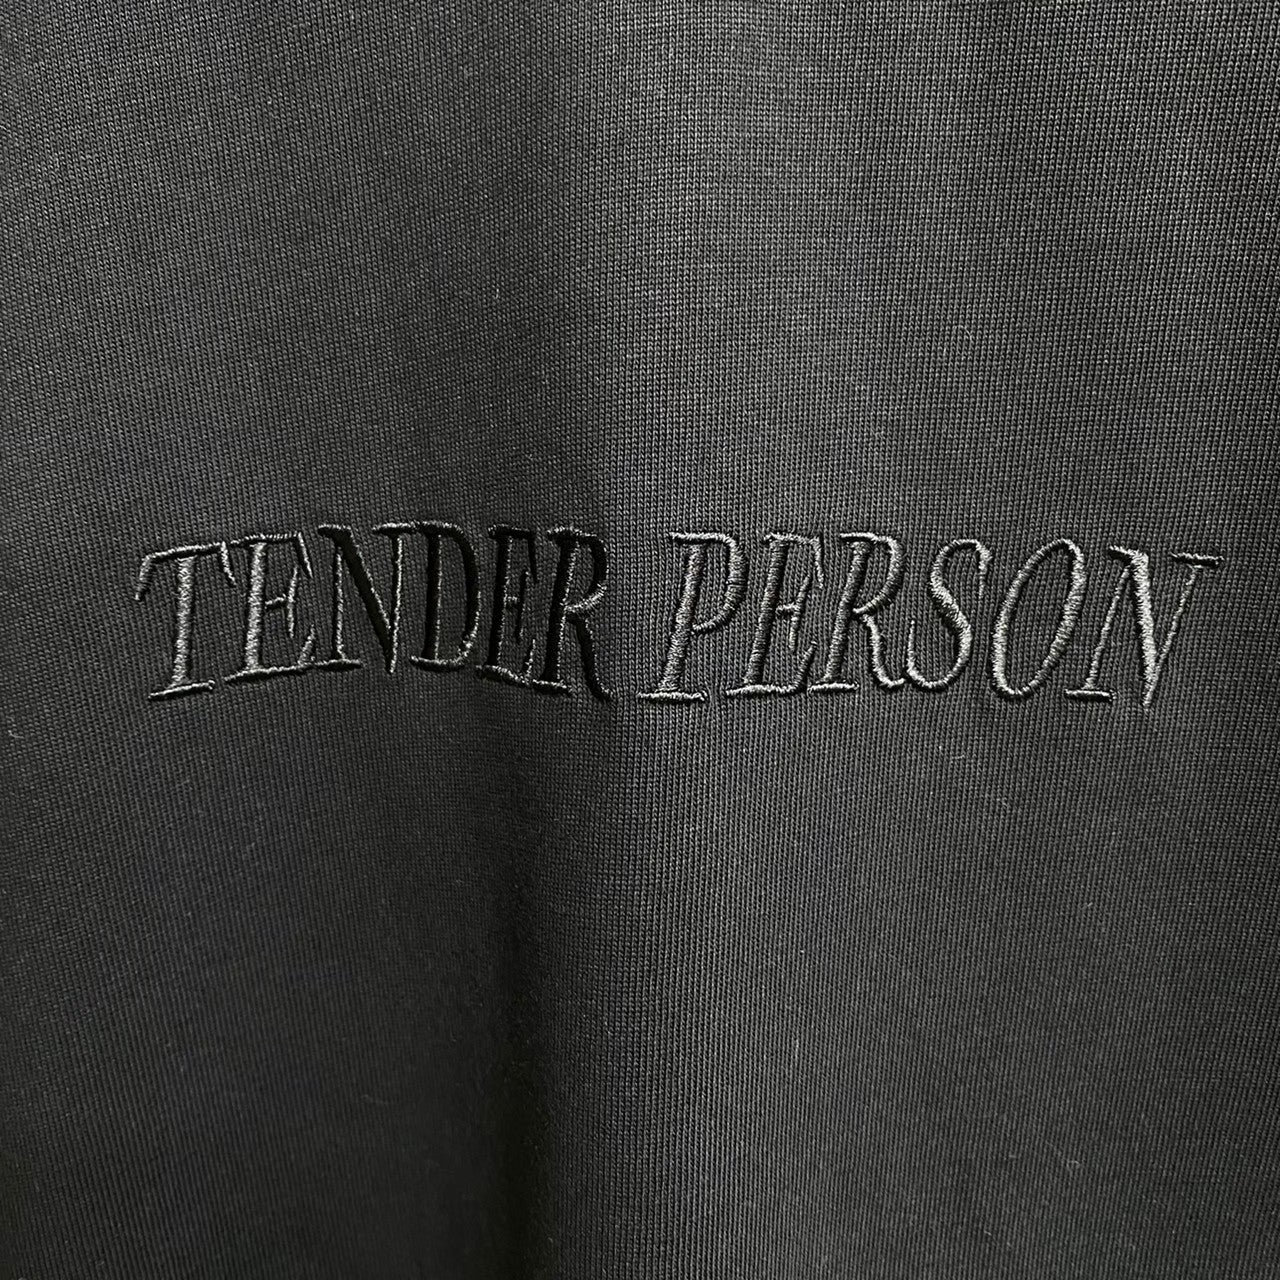 [ FINAL ONE ! ] TENDER PERSON STANDERD SHORT SLEEVE T-SHIRTS / TENDER PERSON